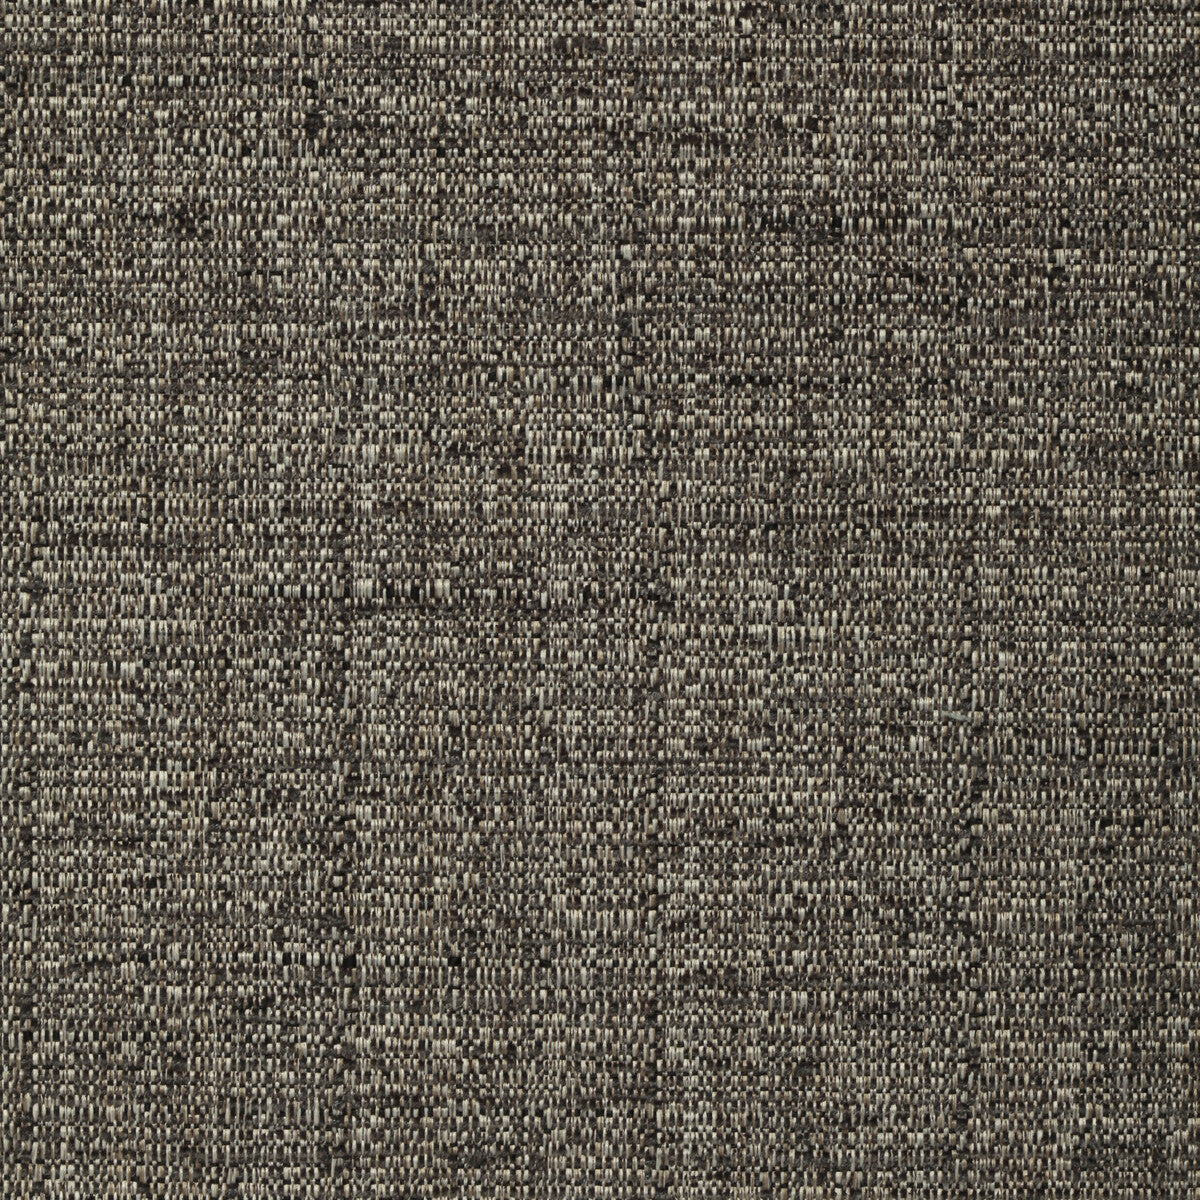 Kravet Contract fabric in 35128-21 color - pattern 35128.21.0 - by Kravet Contract in the Crypton Incase collection